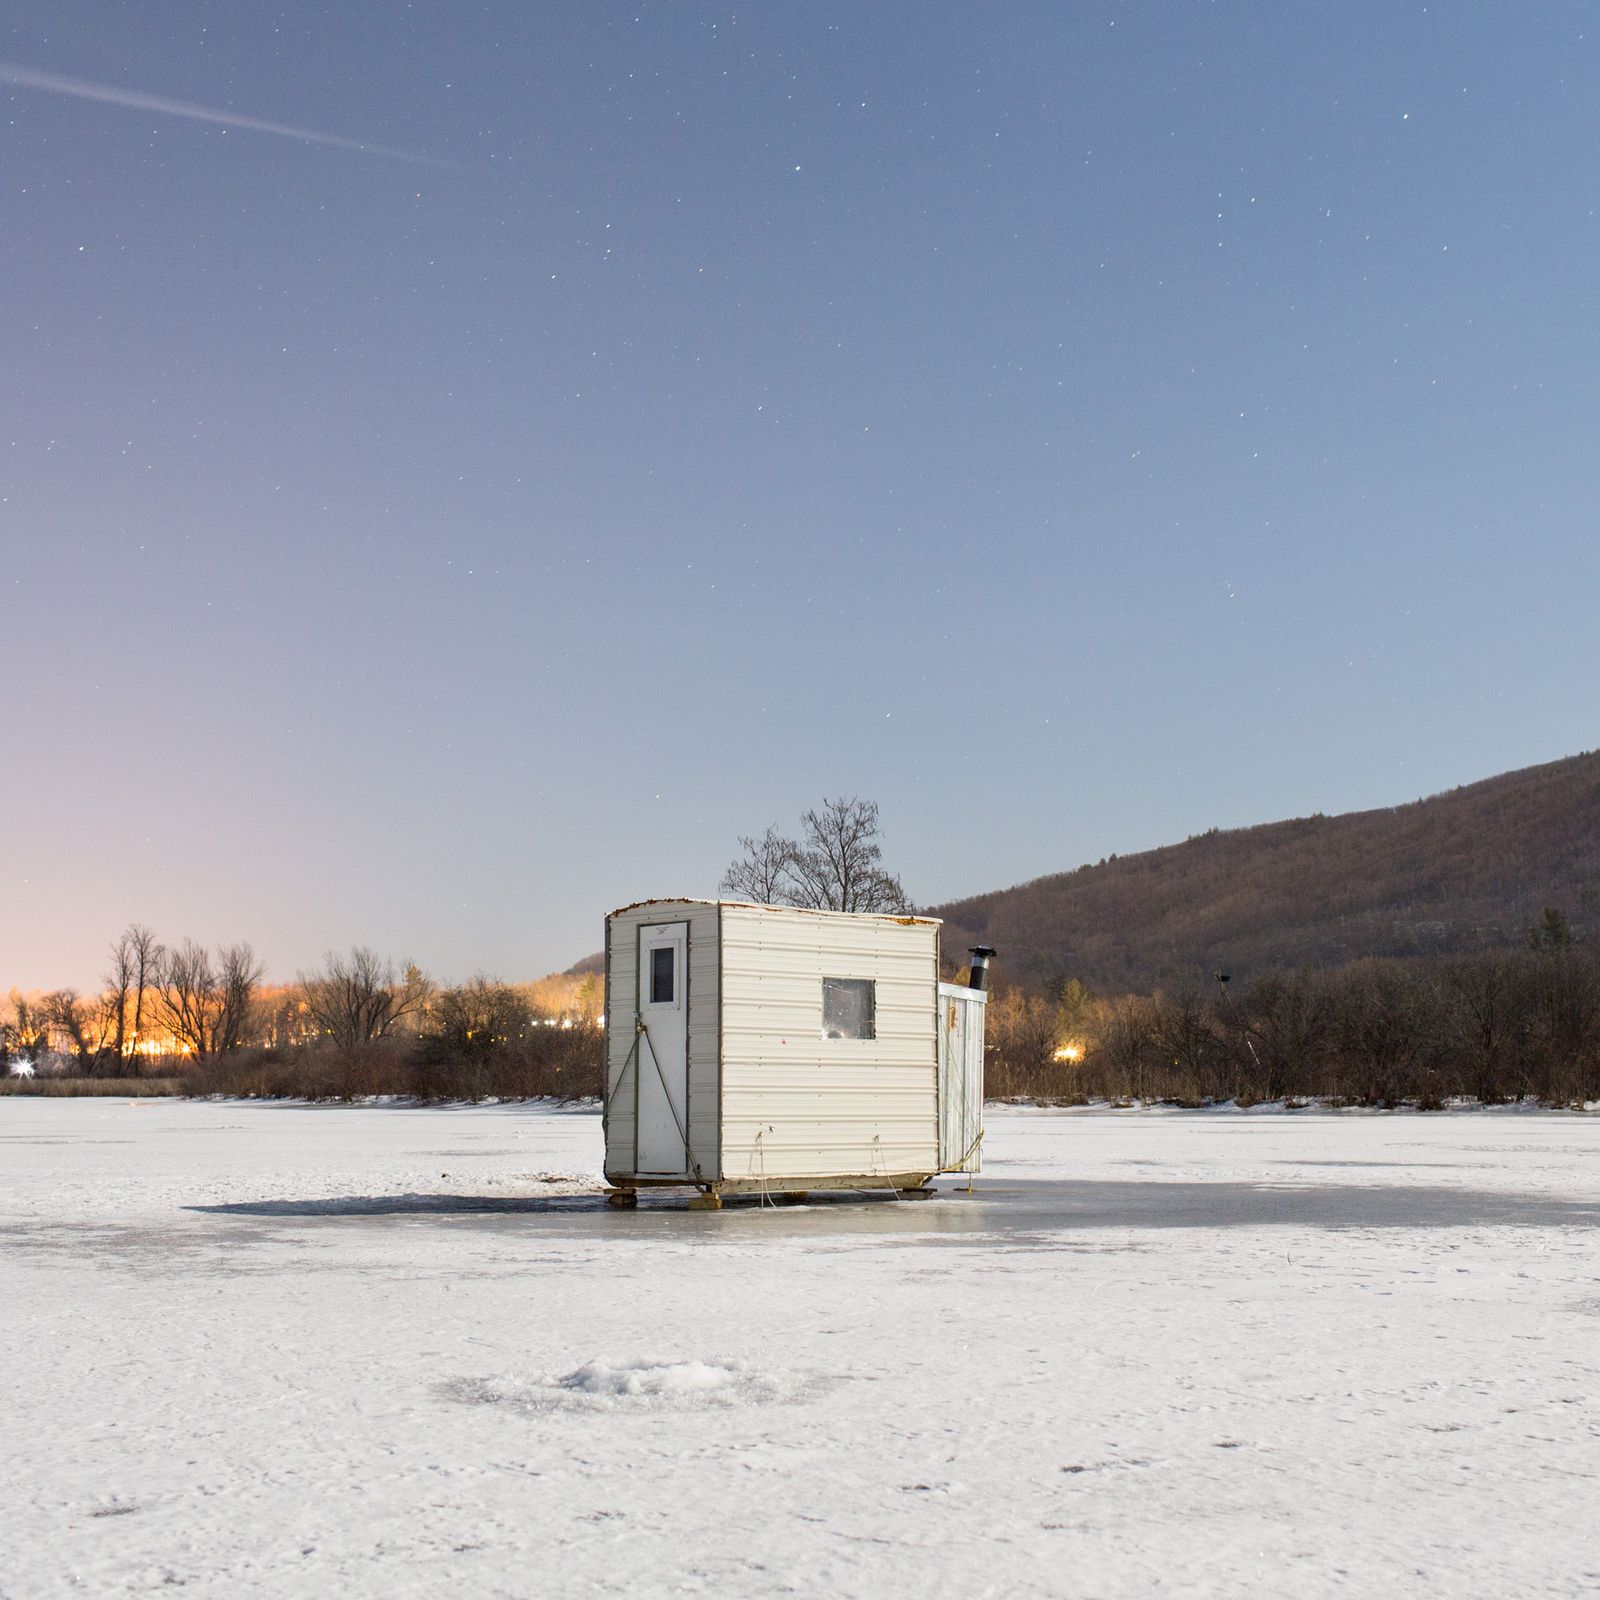 © Federico Pardo - Image from the Ice shanties photography project